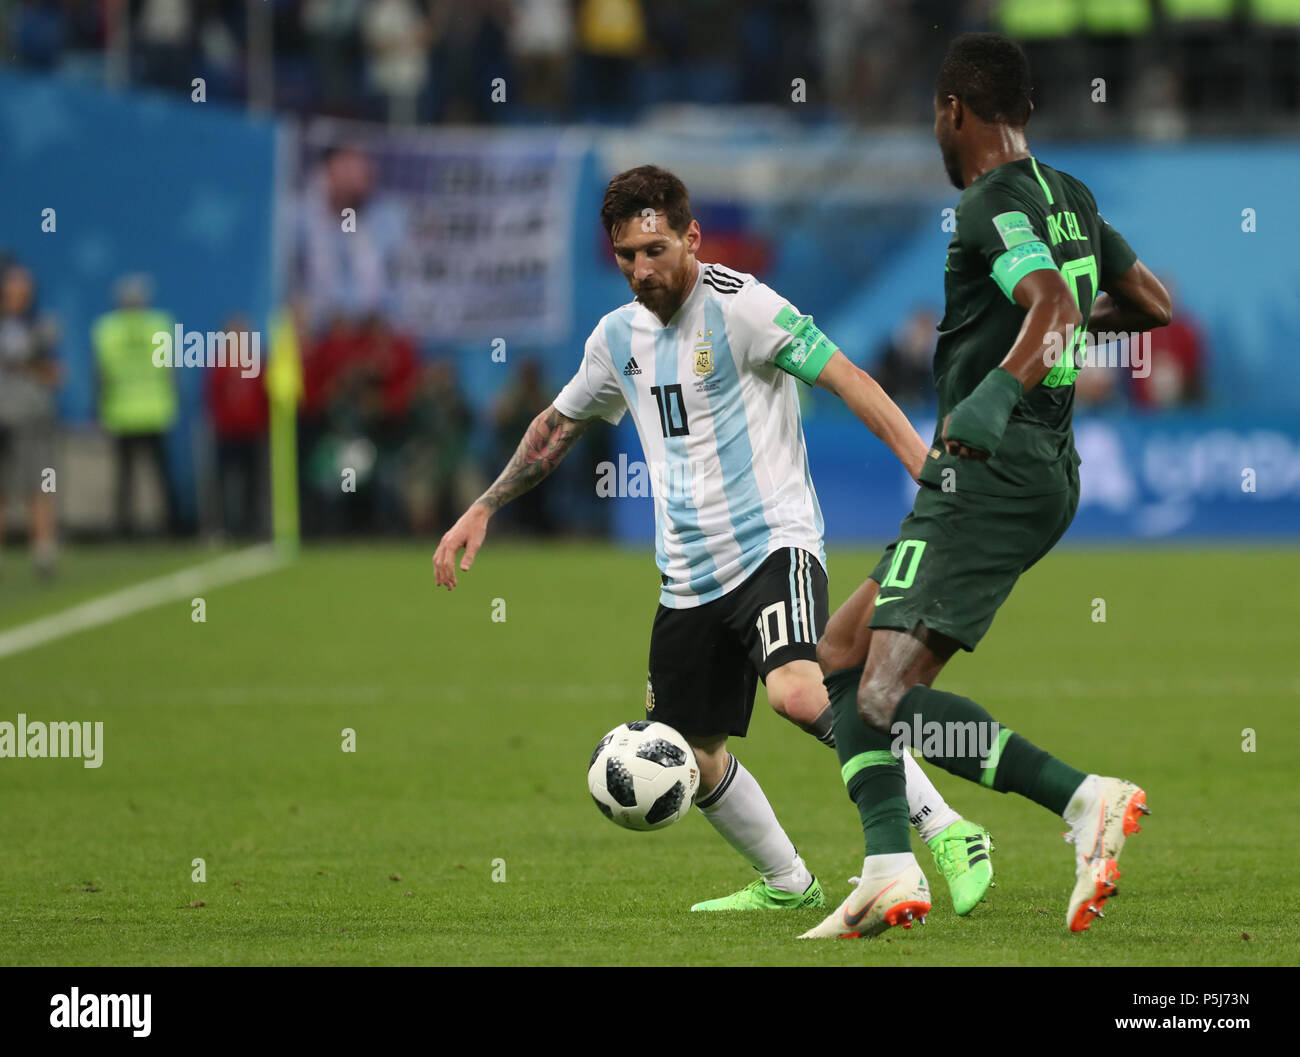 Moscow, Russia. 26th June, 2018. Soccer, World Cup 2018, Preliminary round, Group D, 3rd game day, Nigeria vs Argentina at the St. Petersburg Stadium: Argentina's Lionel Messi and Nigeria's John Obi Mikel (R) vie for the ball. Credit: Cezaro De Luca/dpa/Alamy Live News Stock Photo